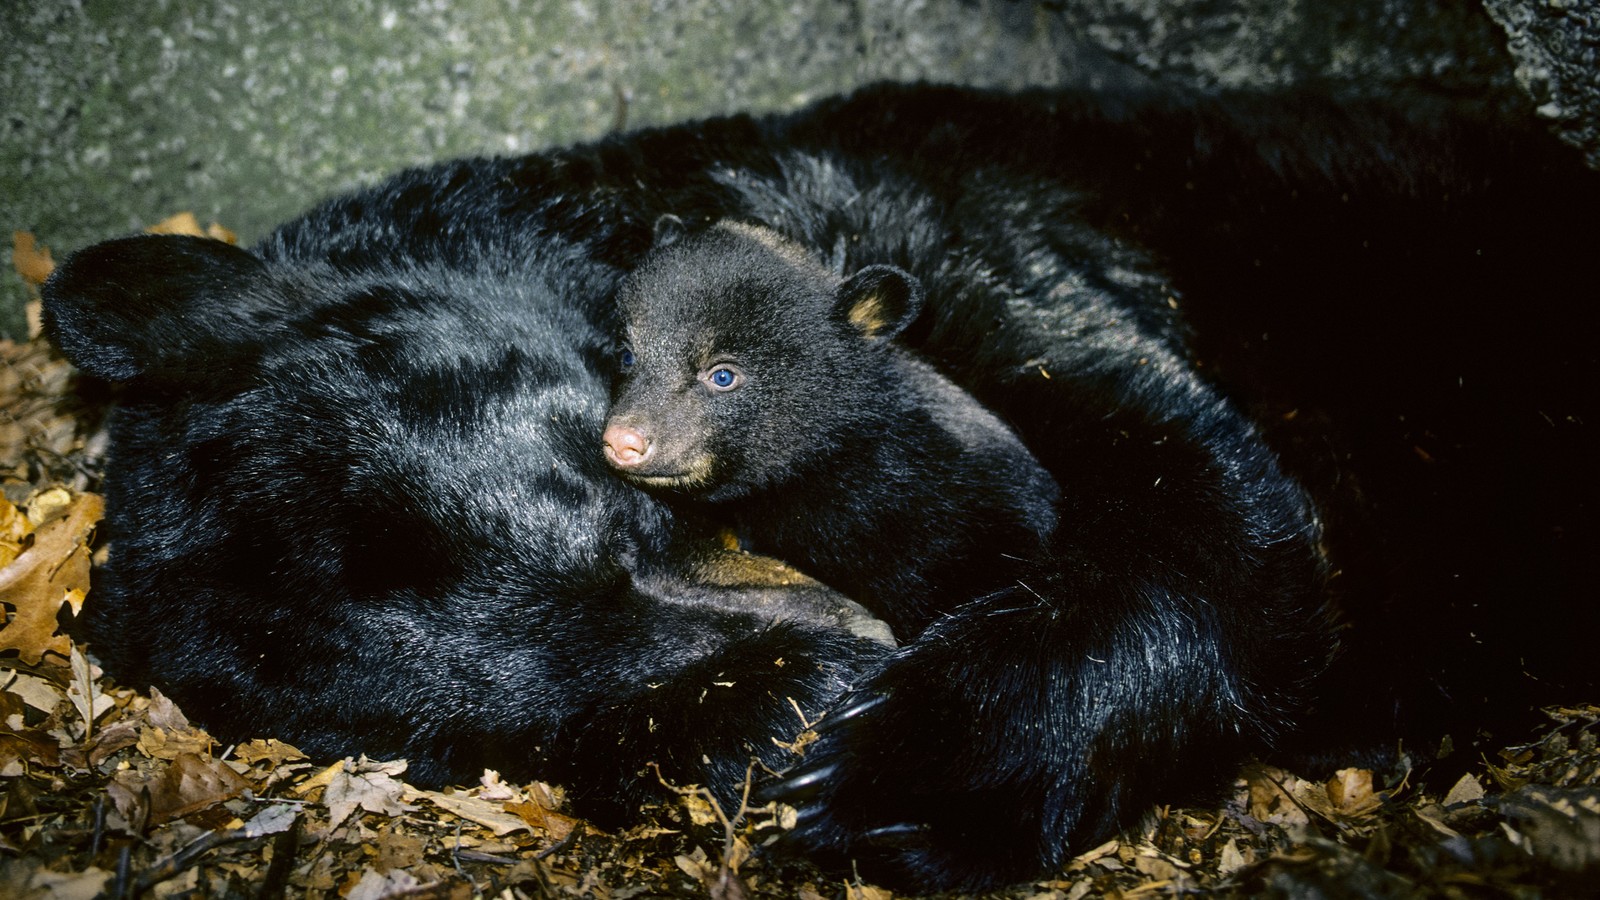 Climate Change Is Messing With Bears' Hibernation Schedules - The Atlantic